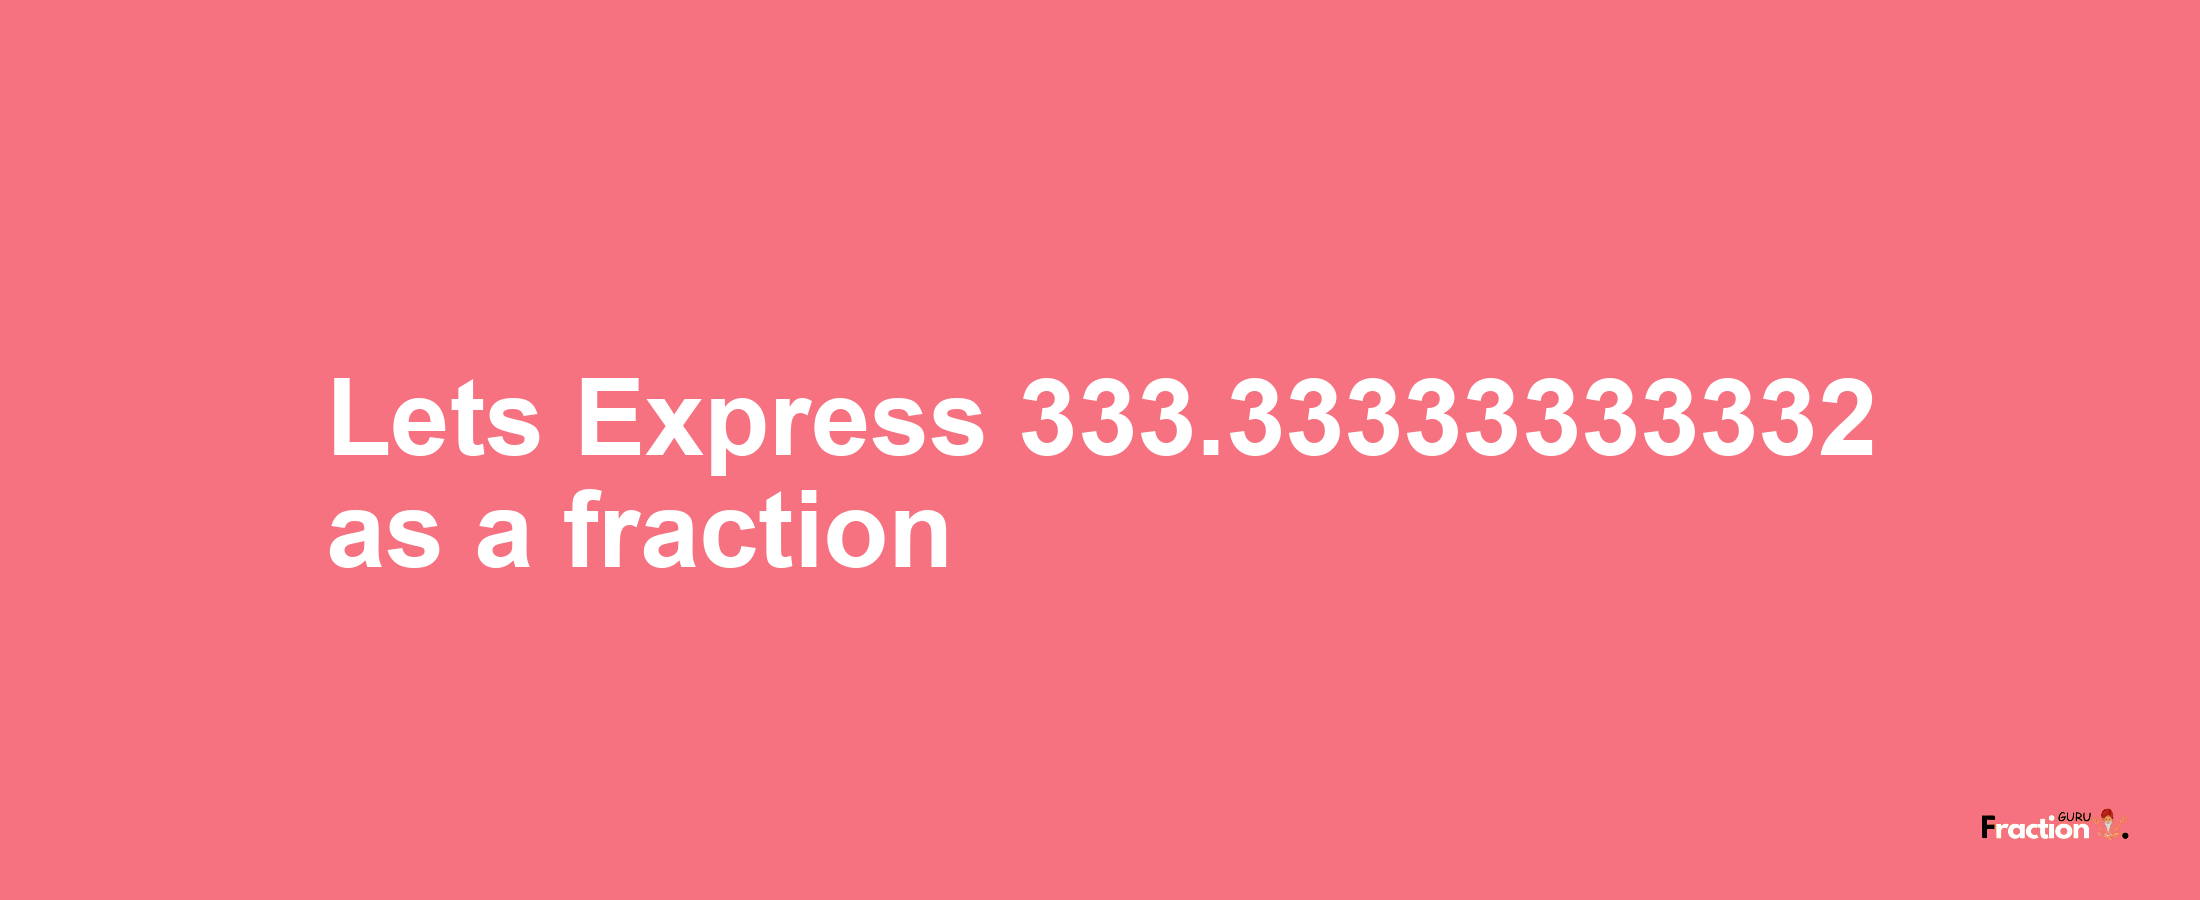 Lets Express 333.33333333332 as afraction